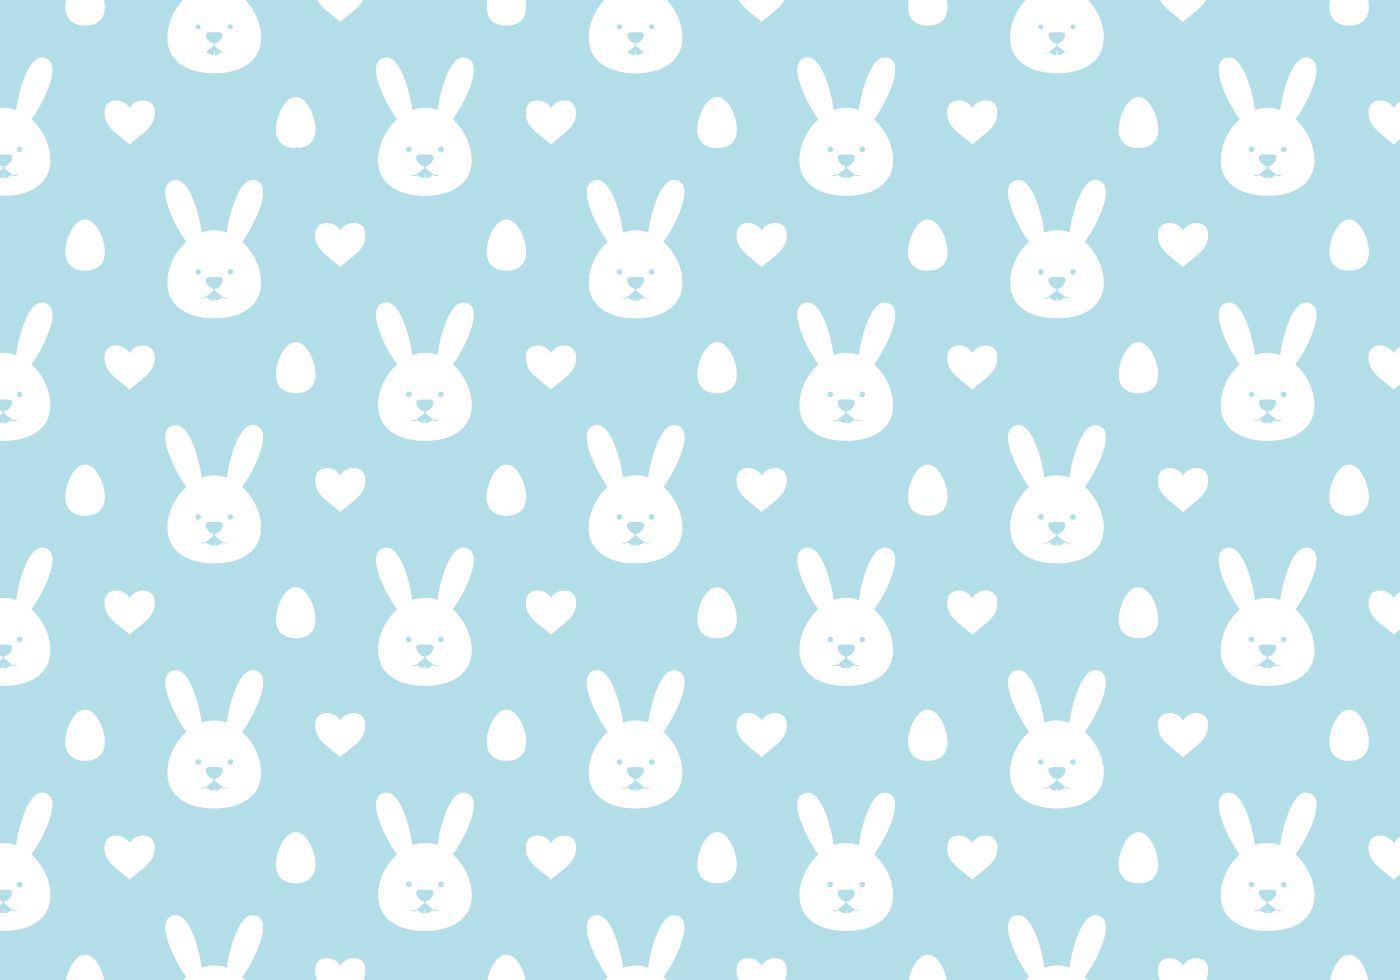 Easter Bunny Wallpaper Background Free Vectors, Clipart